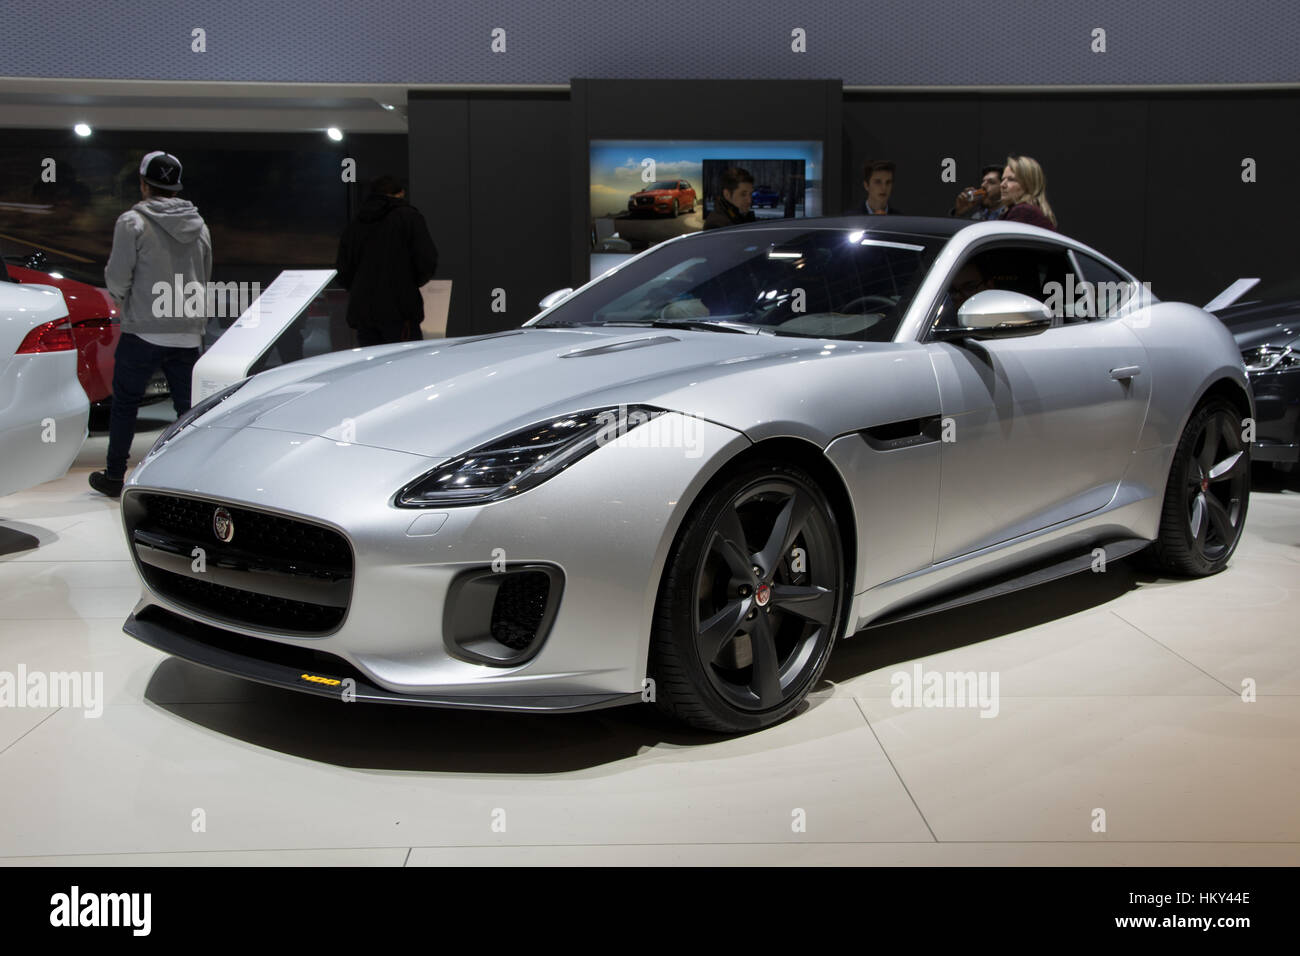 BRUSSELS - JAN 19, 2017: 2018 New Jaguar F-TYPE 400 Sport on display at the Motor Show Brussels. Stock Photo